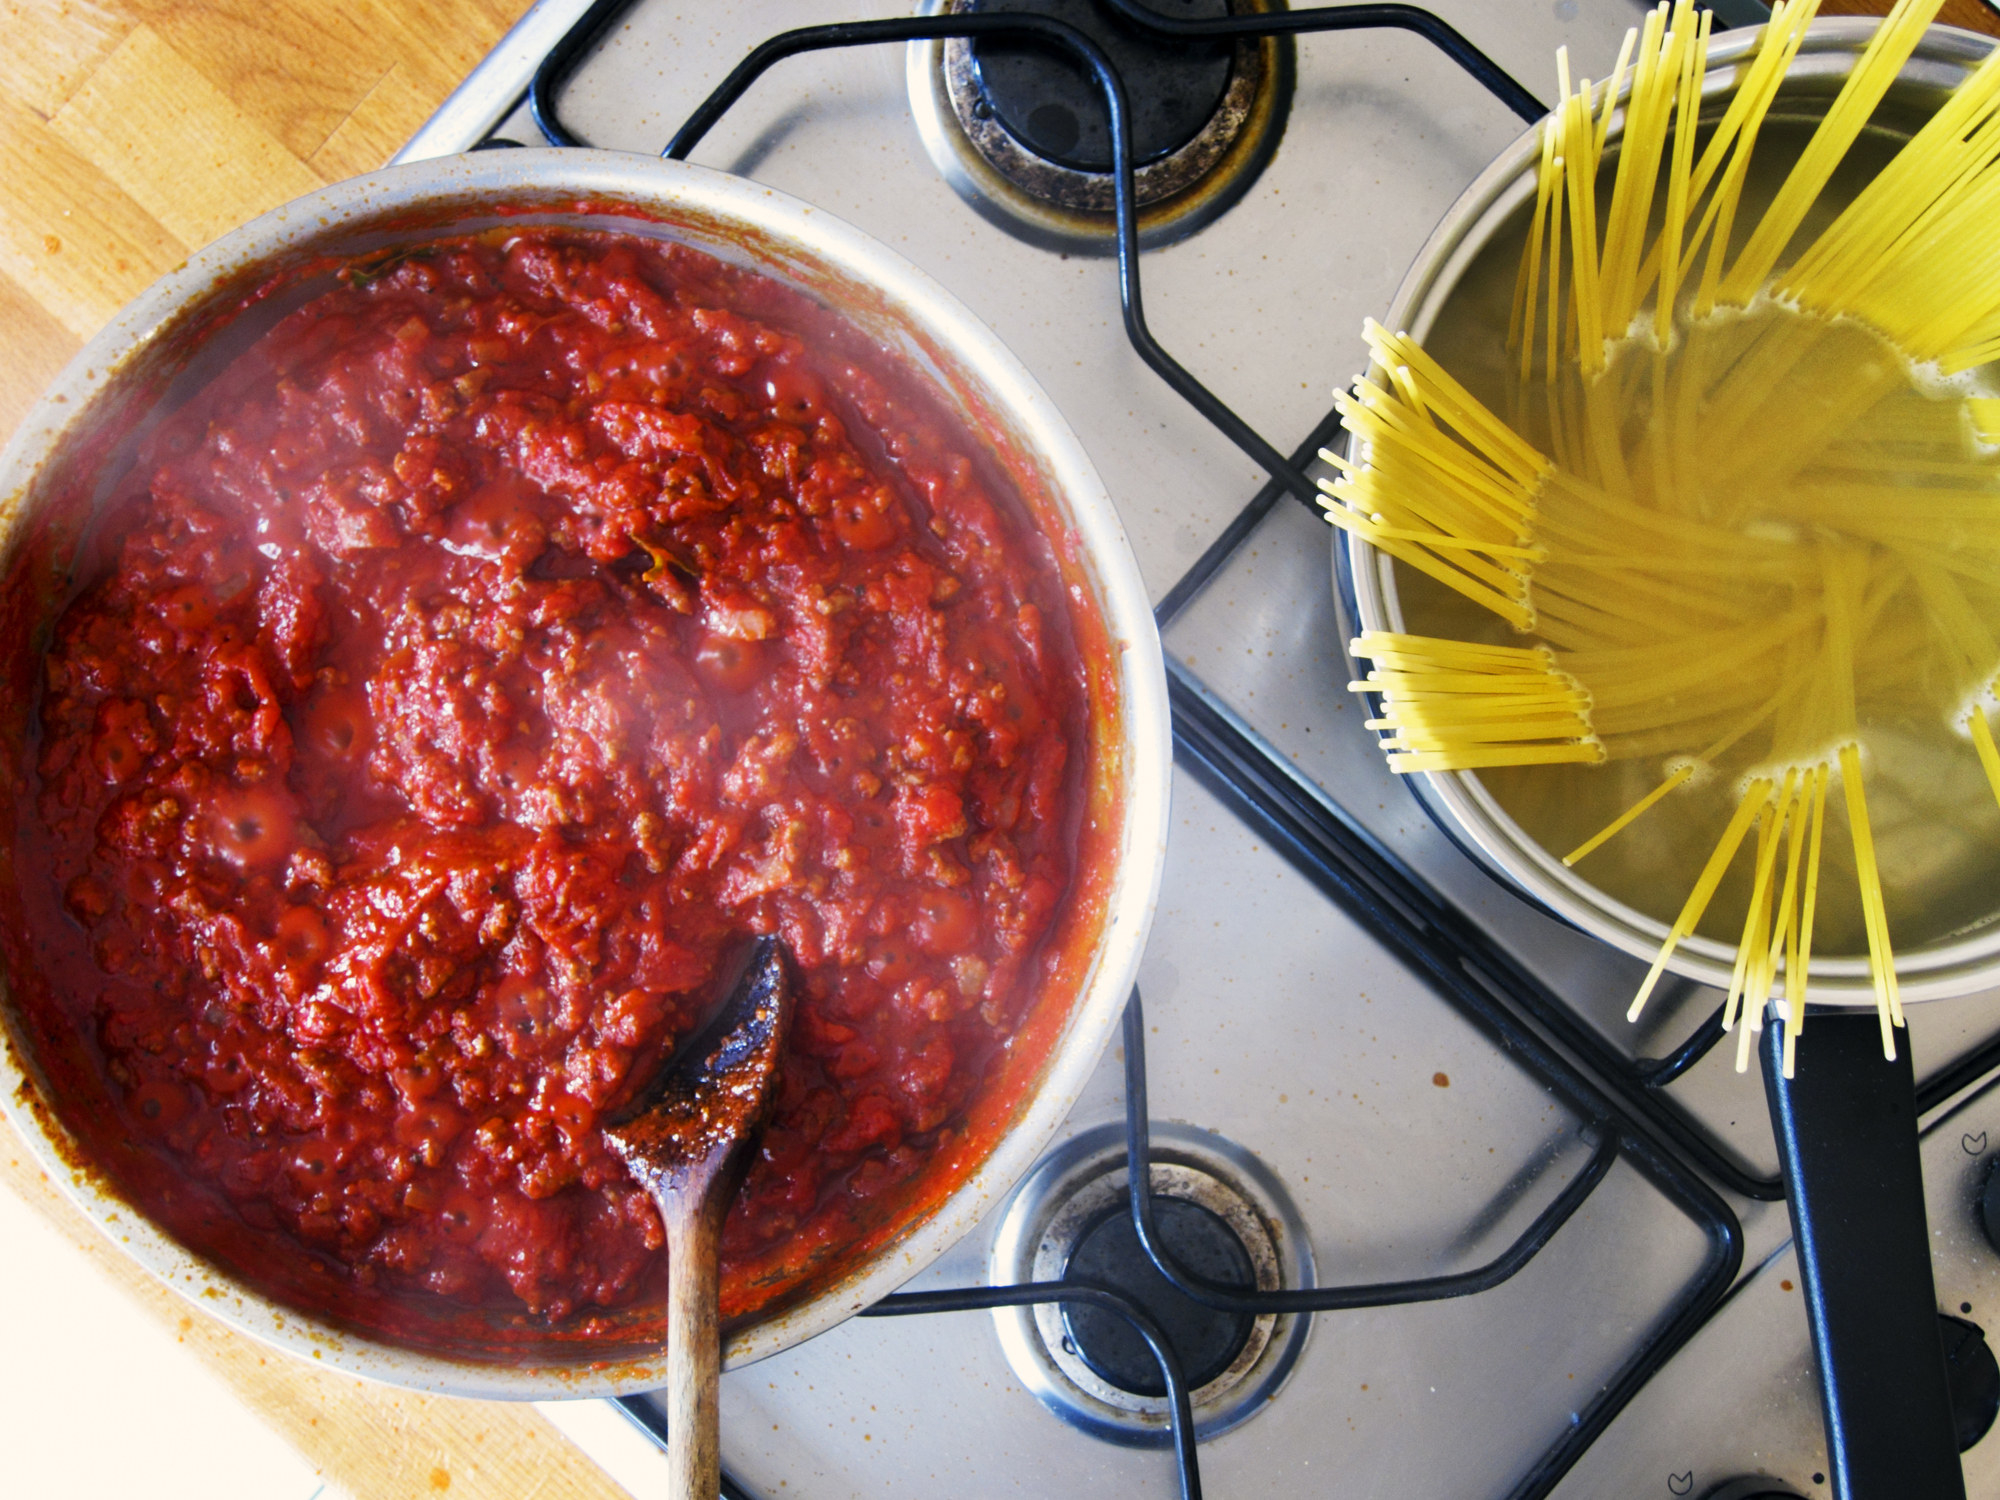 Bolognese sauce in a pot and spaghetti in another.